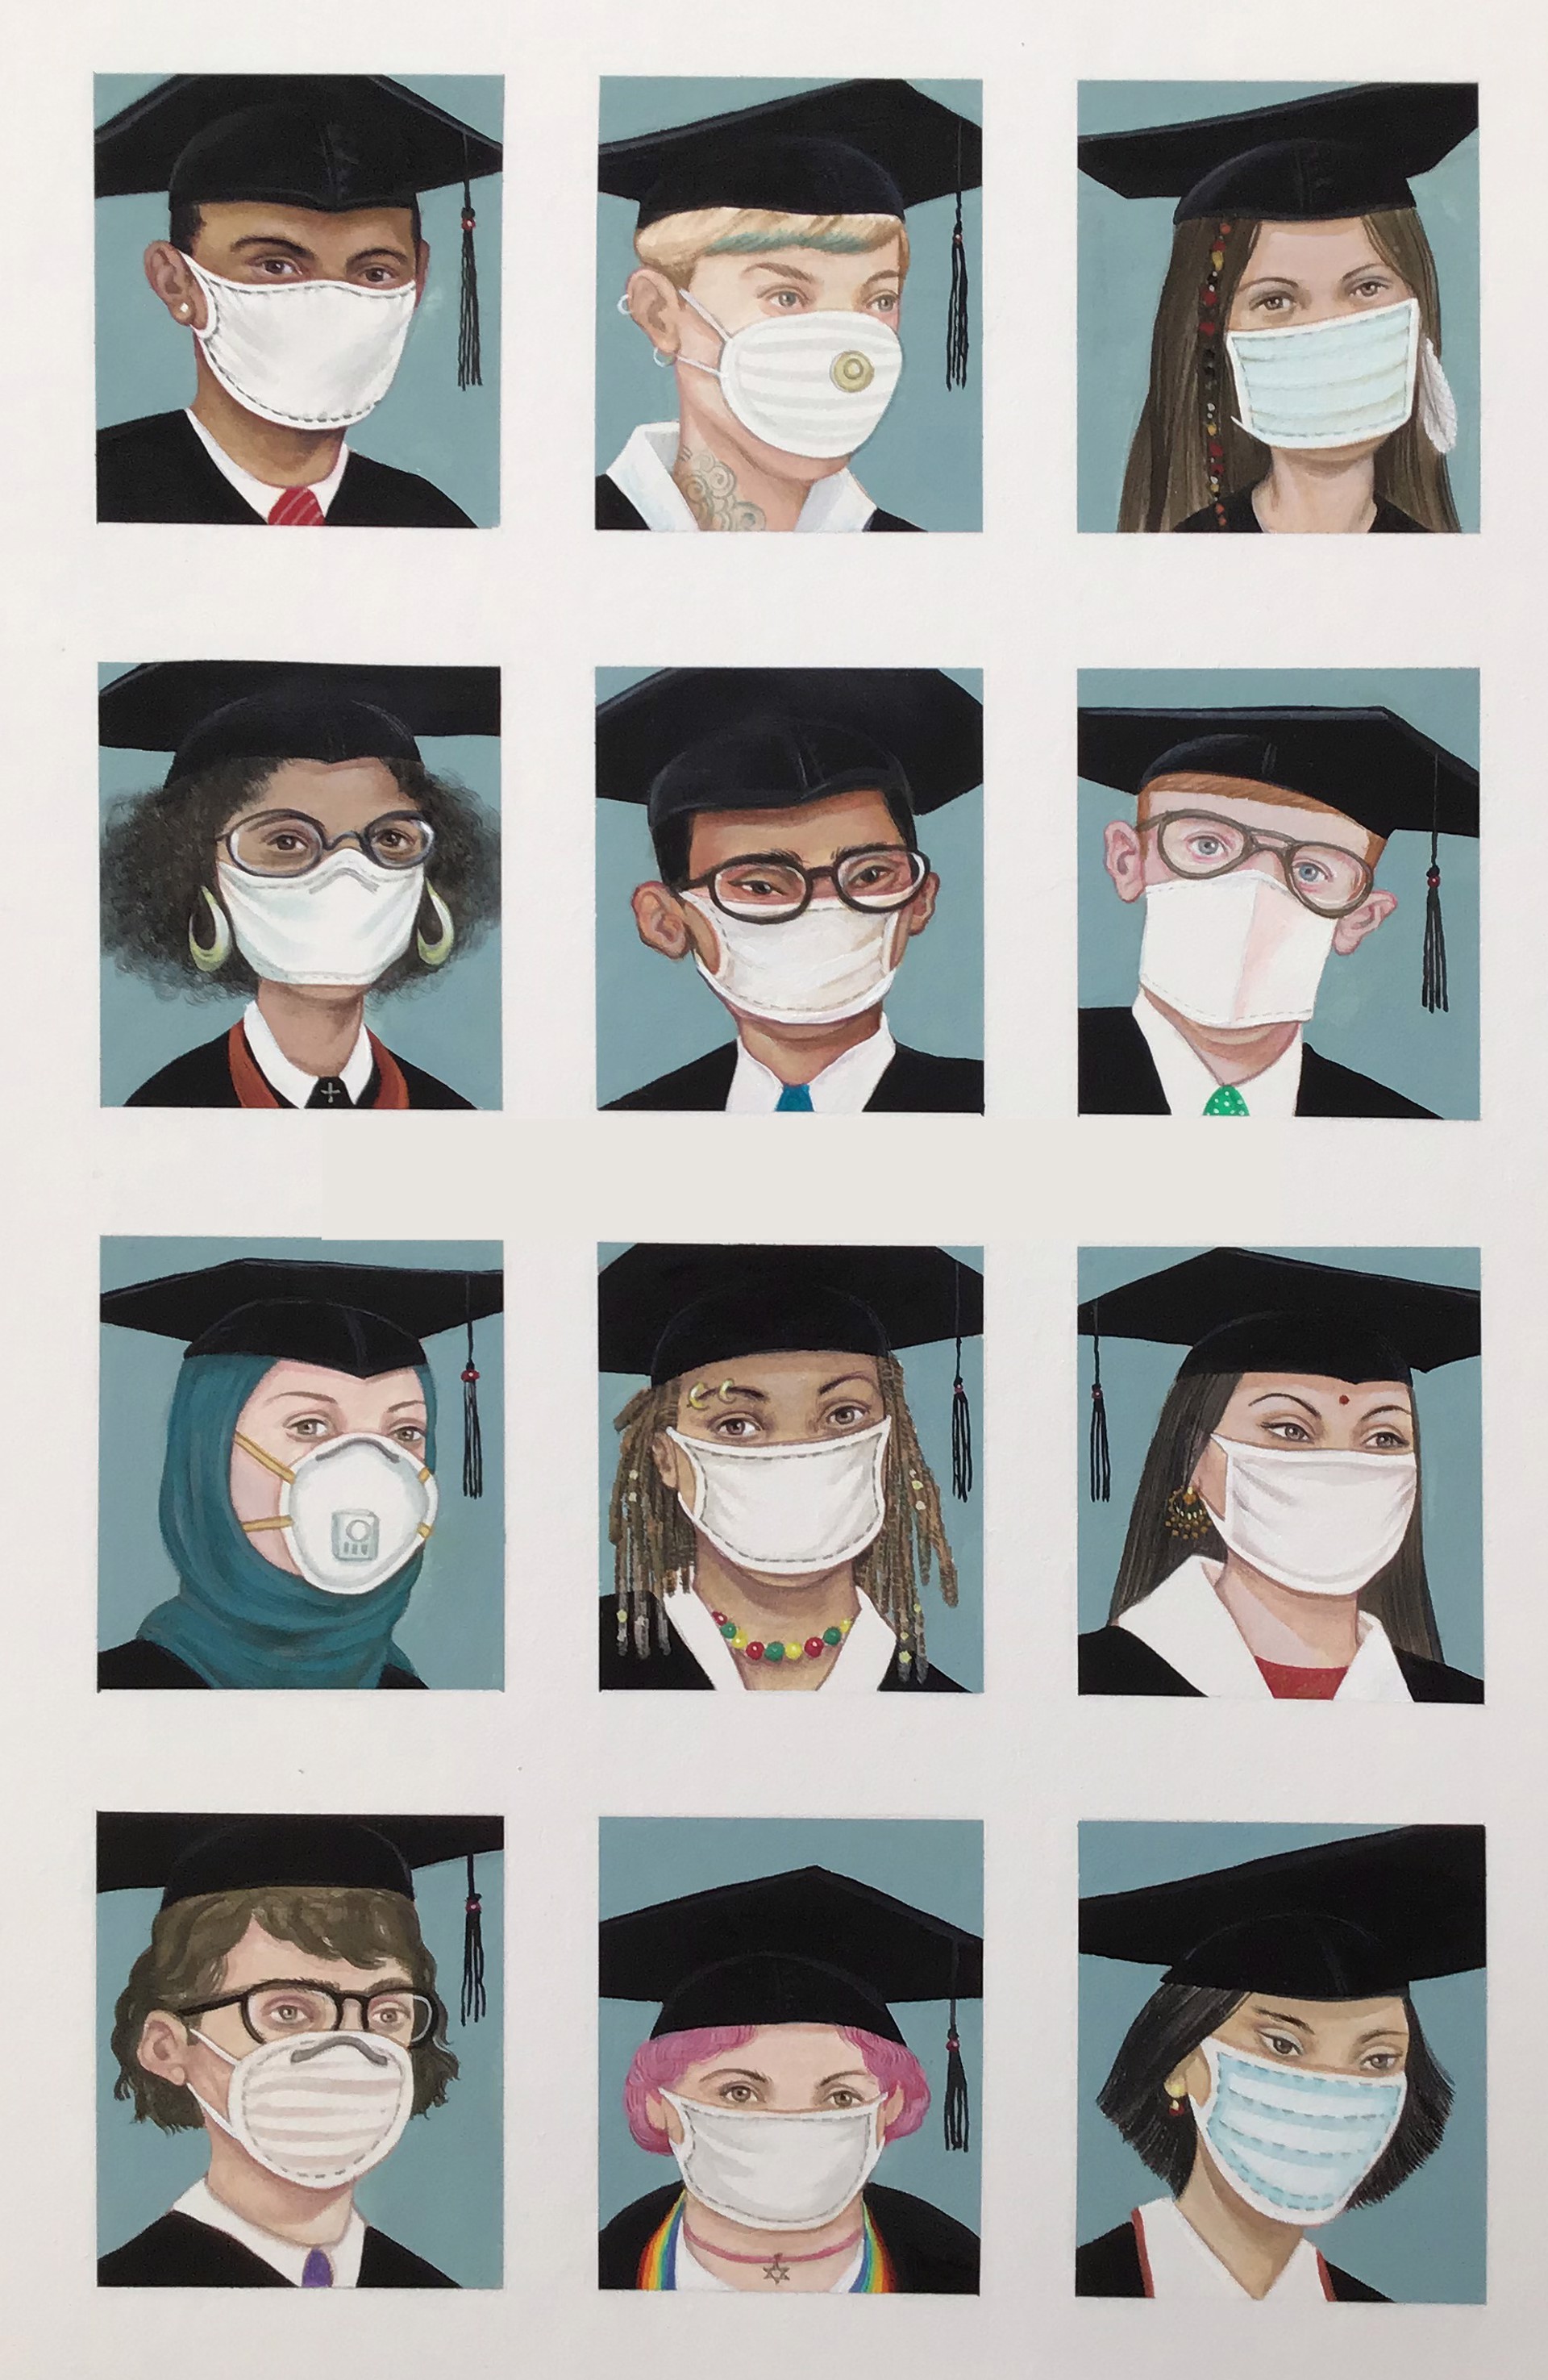 Cover for The New Yorker Magazine: Class of 2020 by Anita Kunz